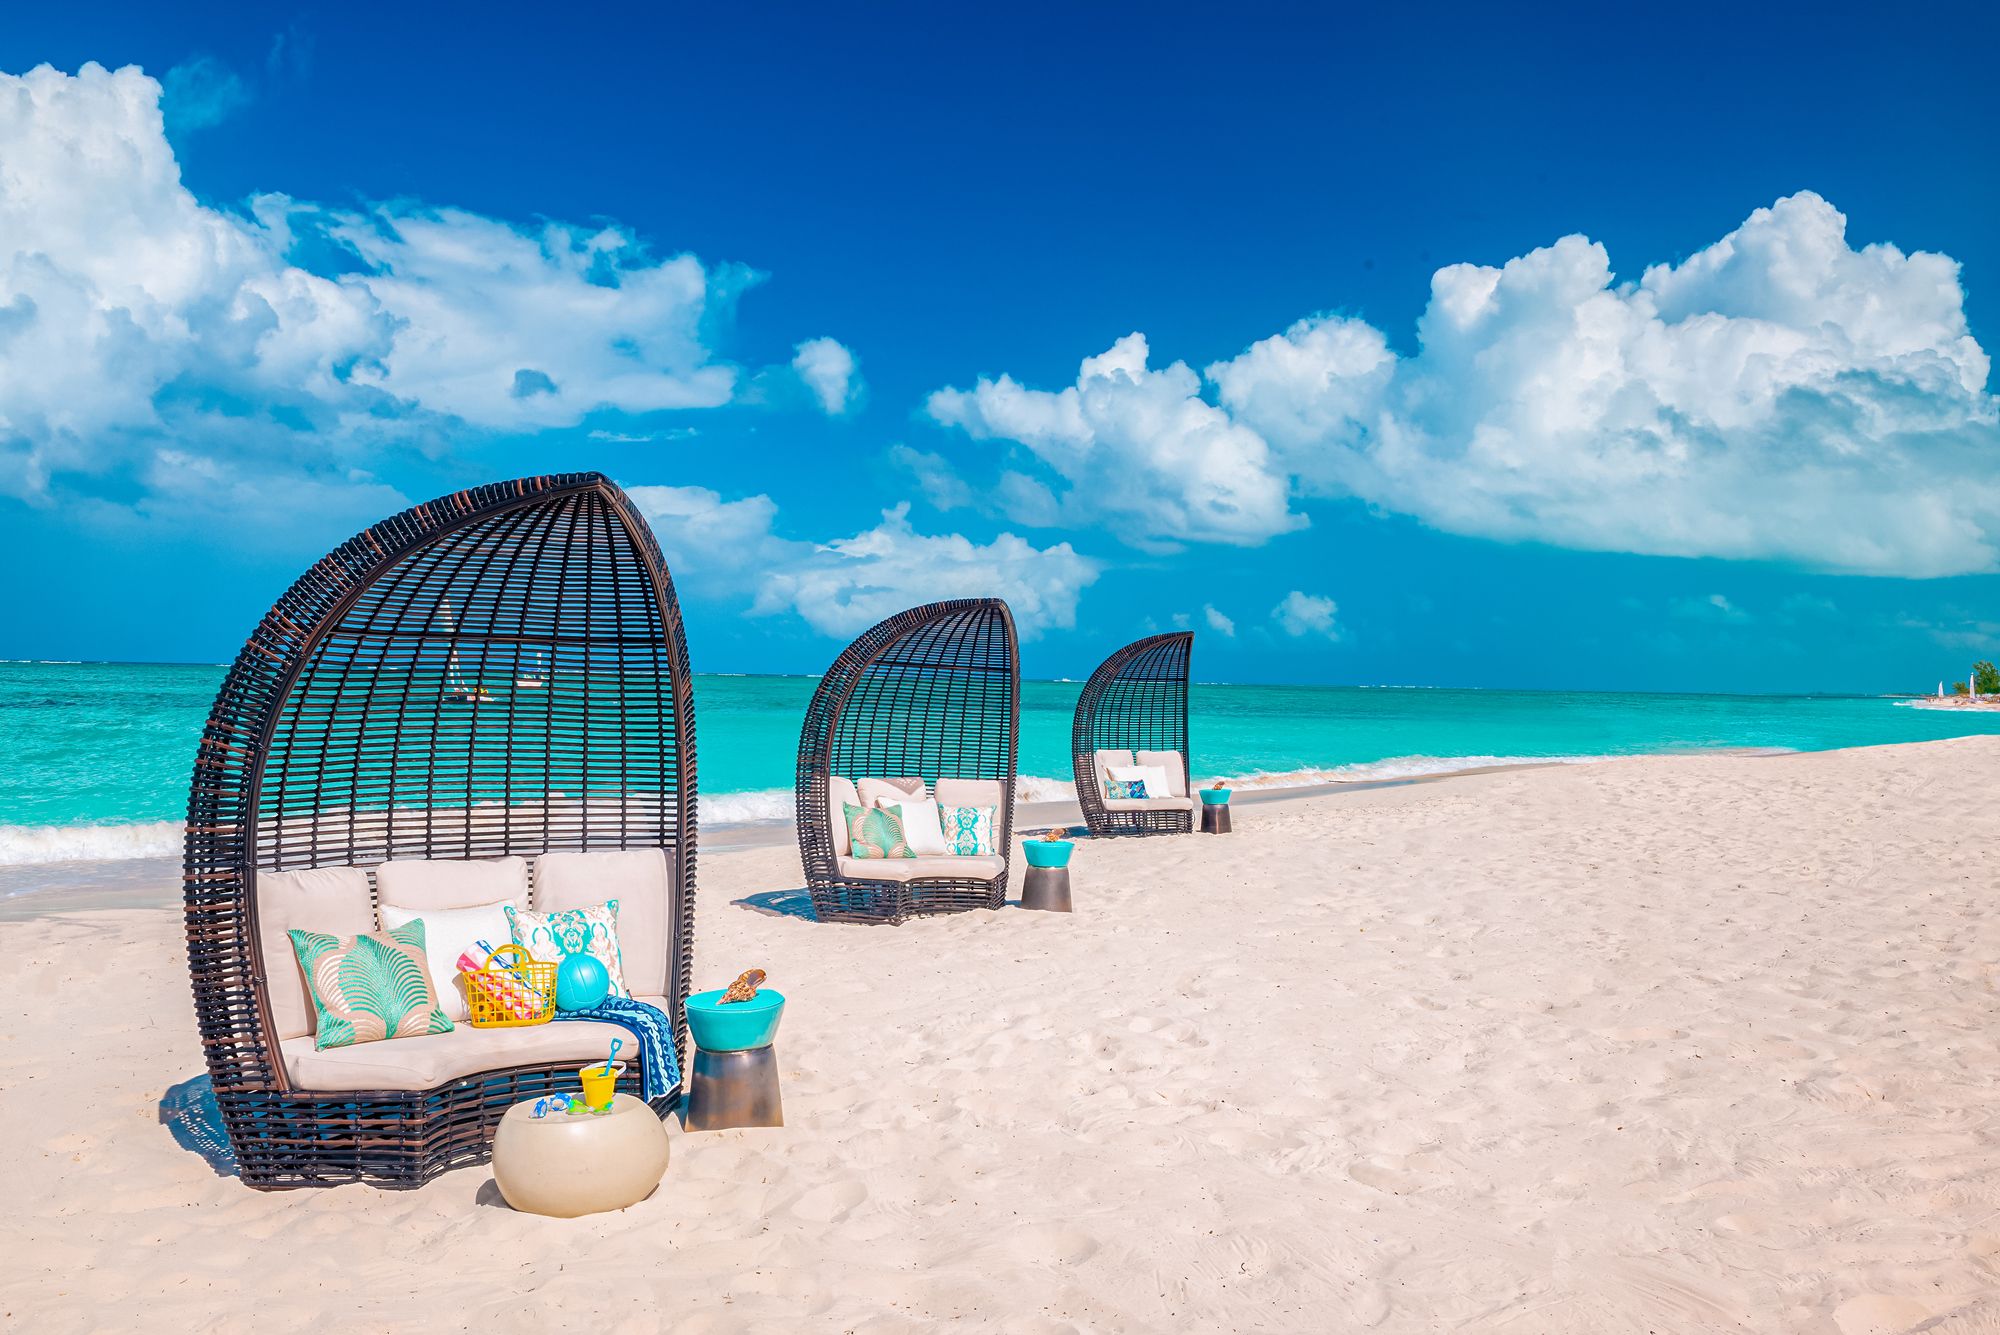 Fun Facts: What is Turks & Caicos Known For?